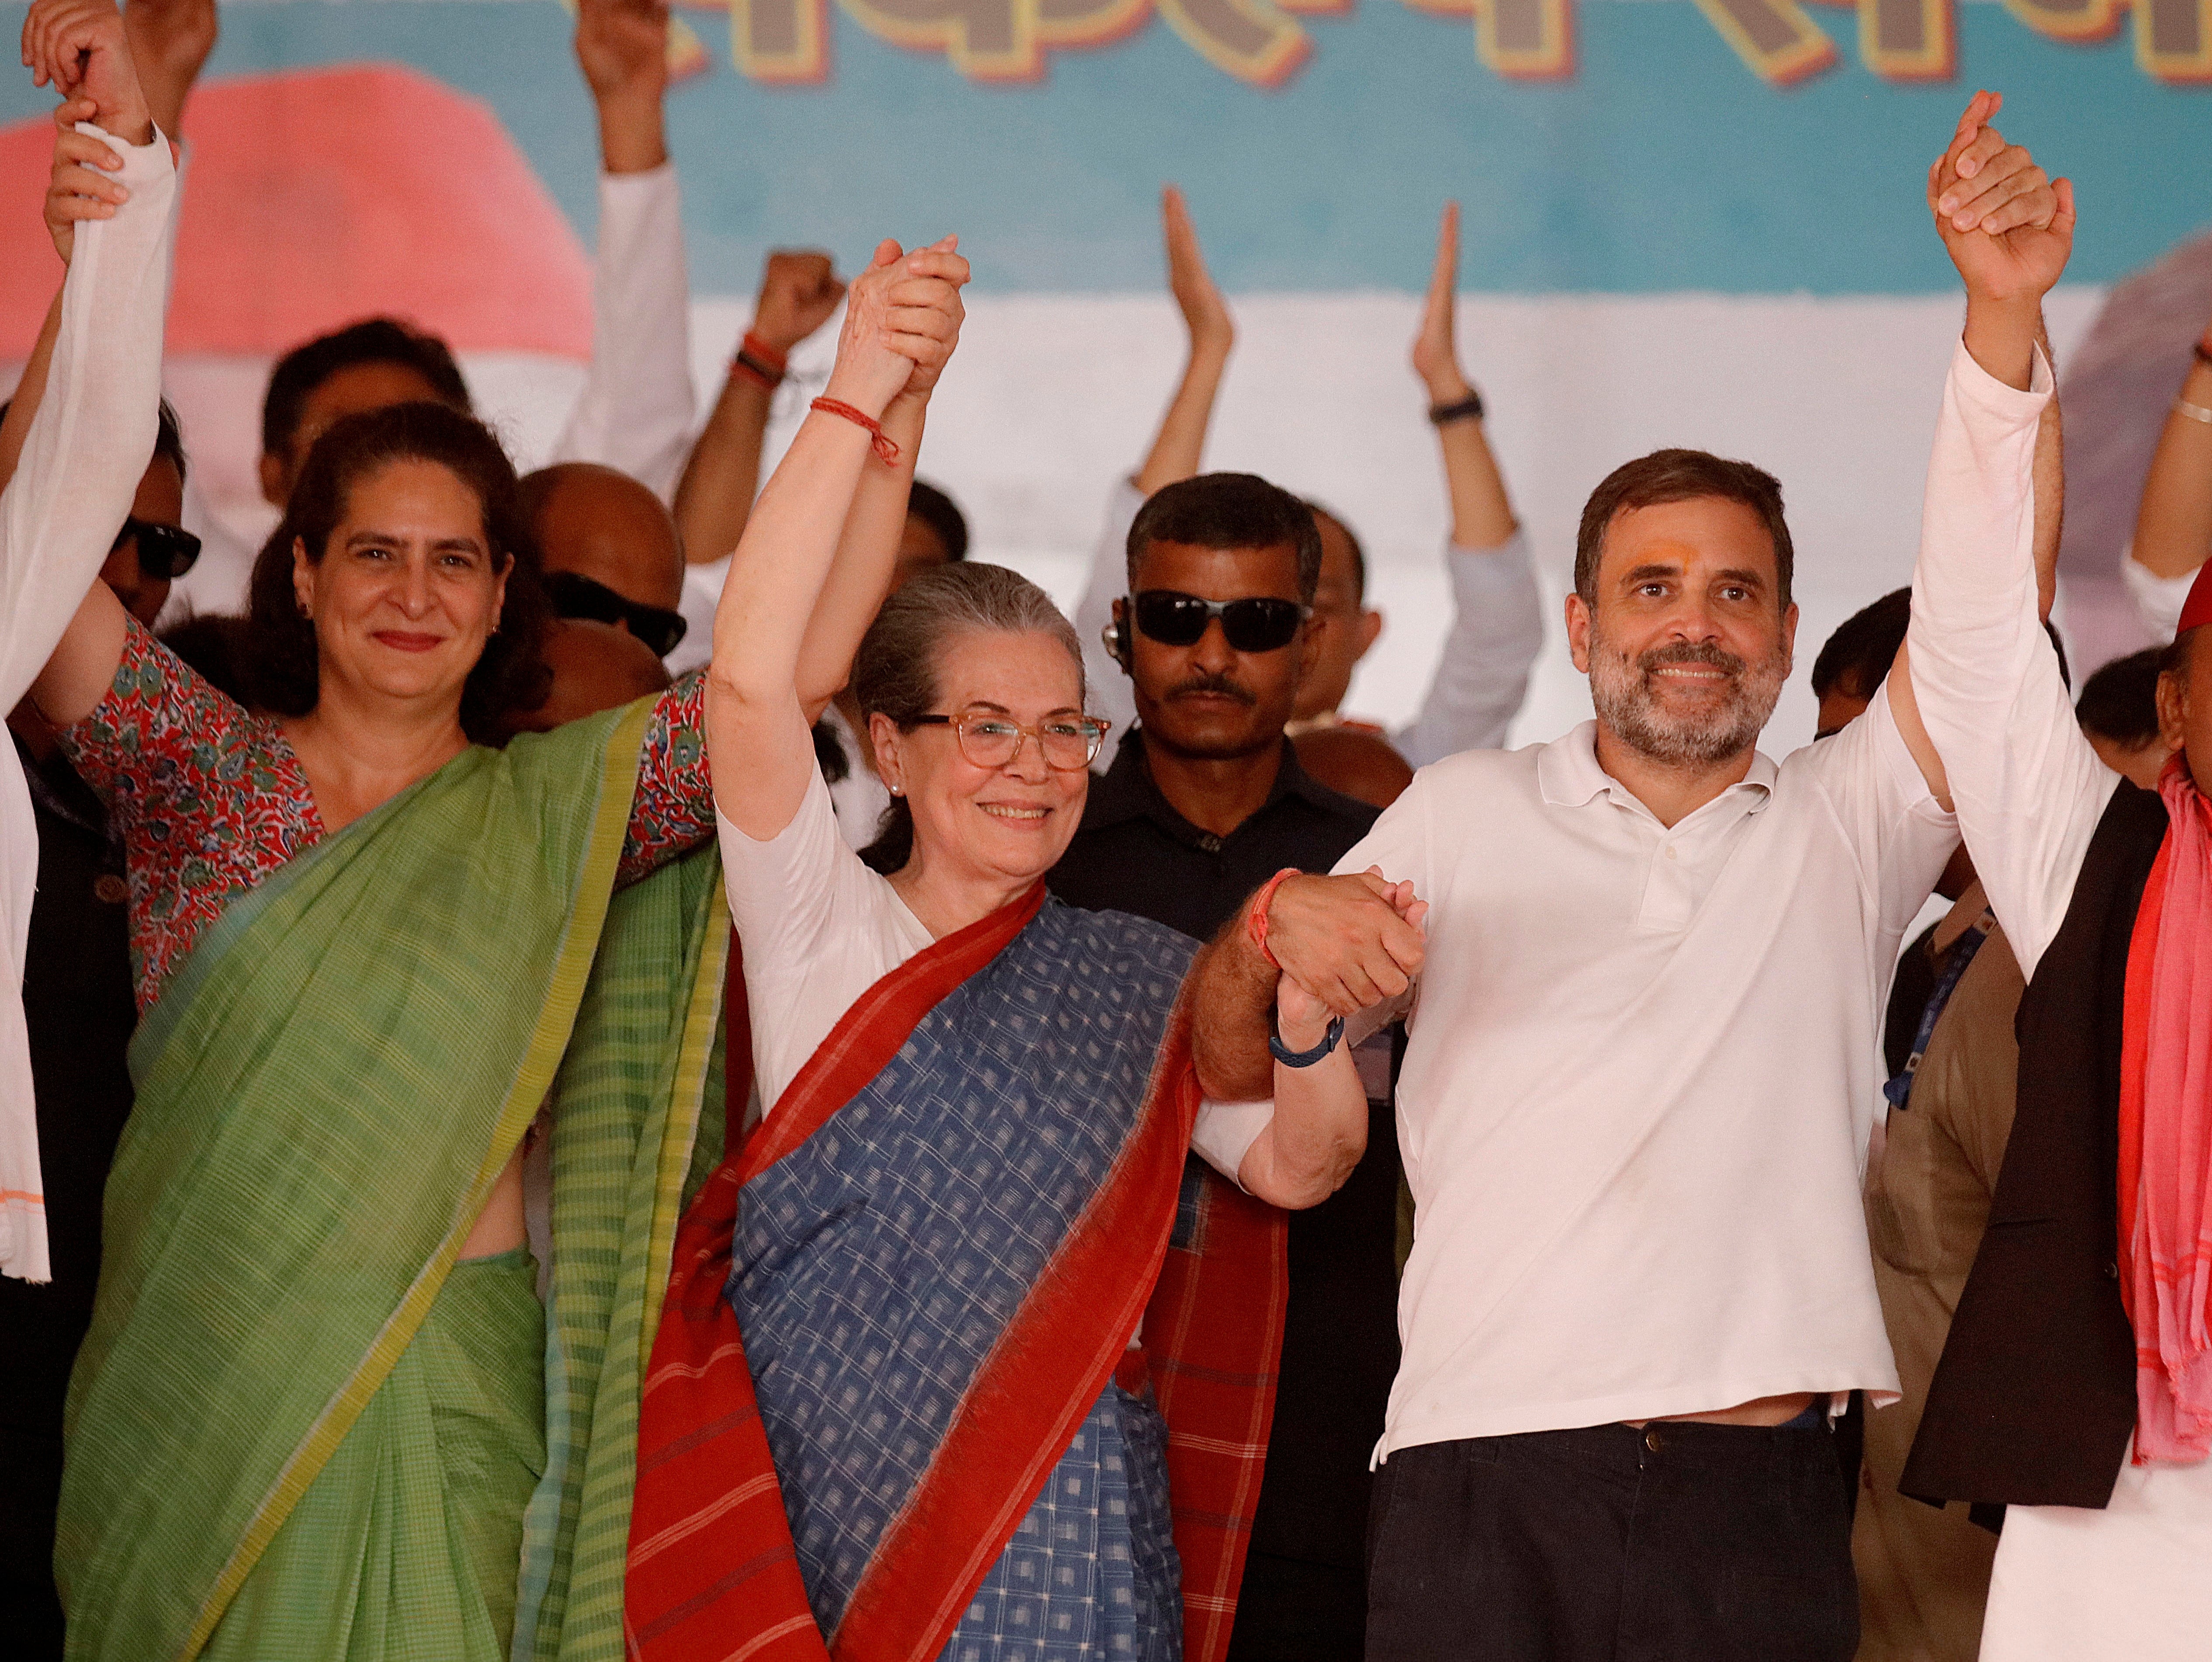 Priyanka Gandhi, Rahul Gandhi and Sonia Gandhi join their hands together during an election campaign rally in Raebareli